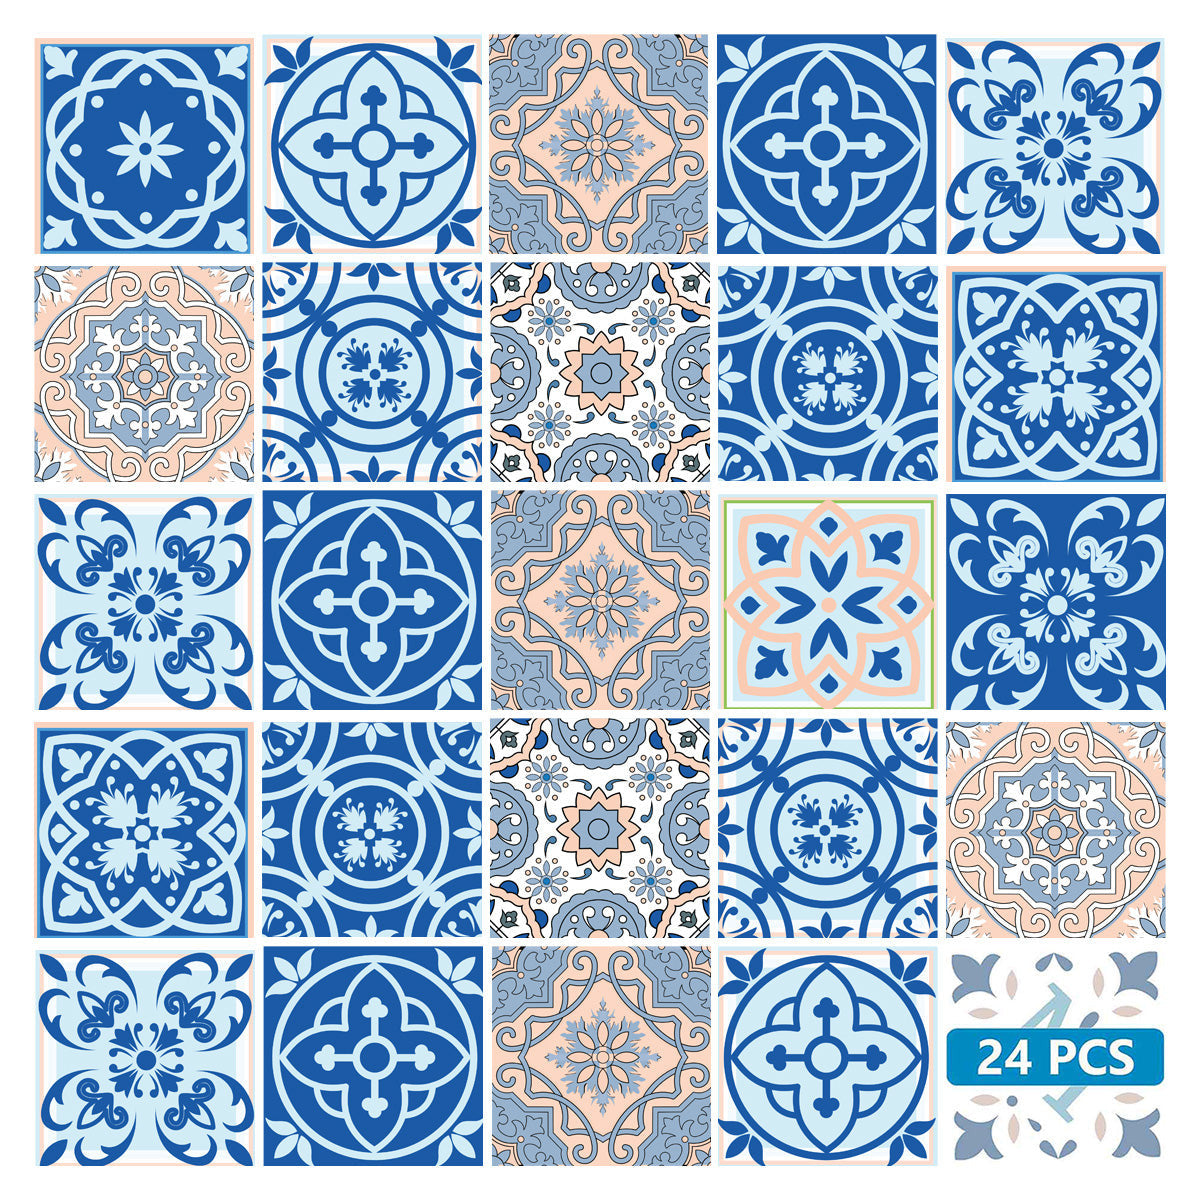 4" X 4" Dark And Light Blue Mosaic Peel And Stick Removable Tiles